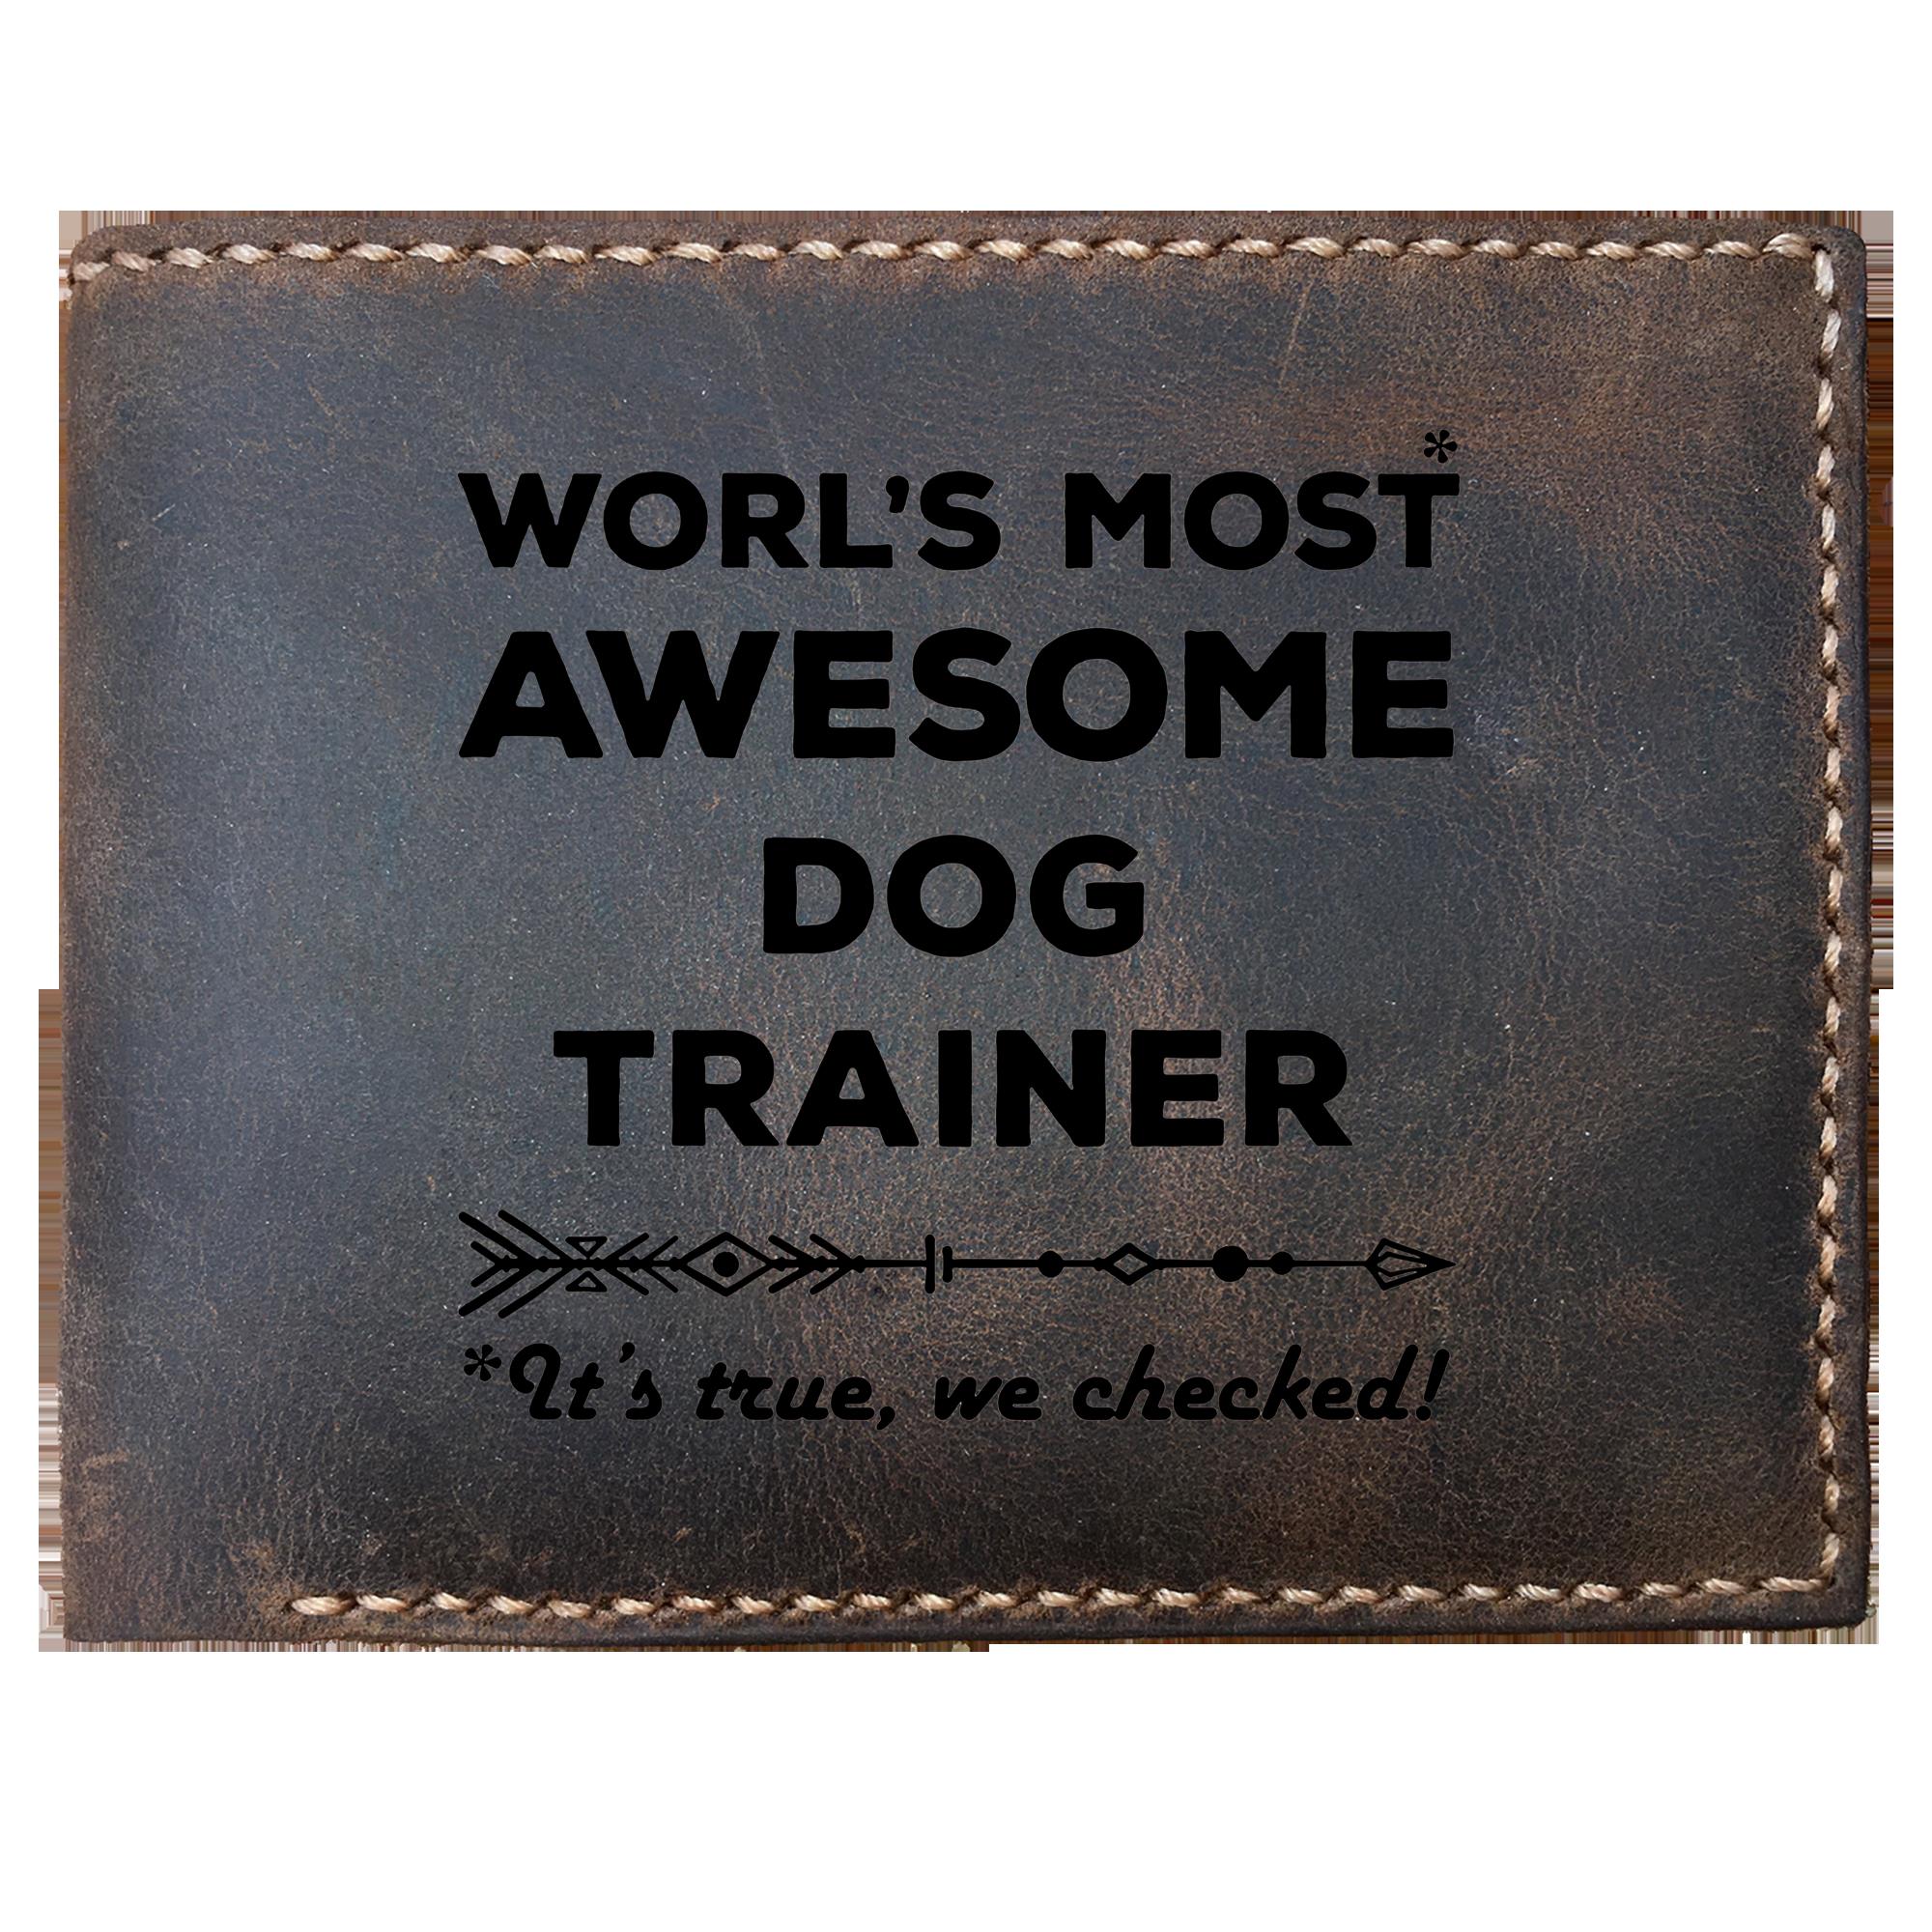 Skitongifts Funny Custom Laser Engraved Bifold Leather Wallet, World's Most Awesome Dog Trainer Best Dog Trainer Ever Animal Lover Presents